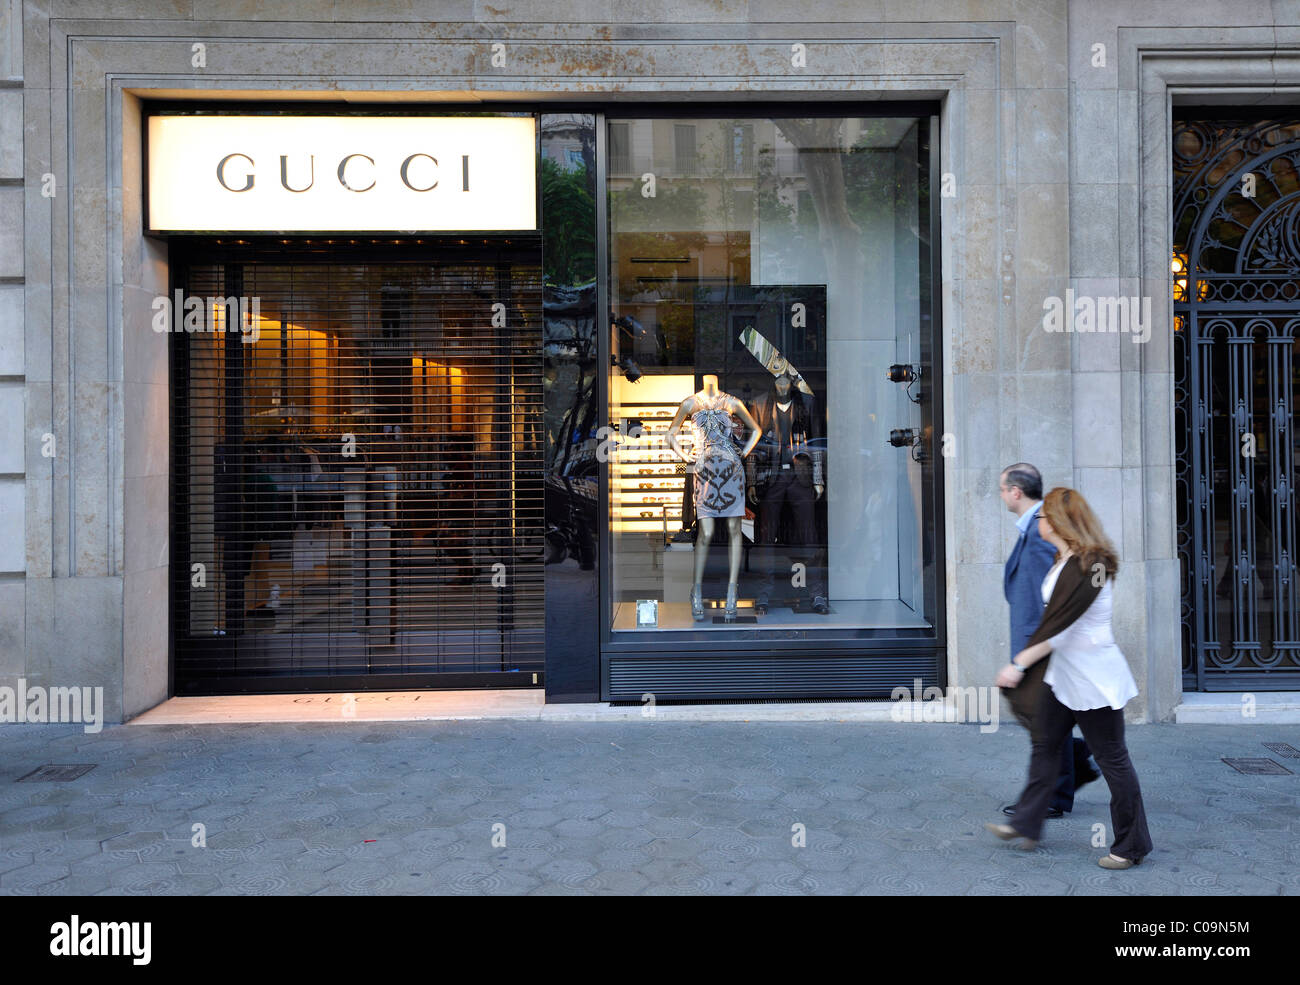 Barcelona Gucci Store High Resolution Stock Photography and Images - Alamy